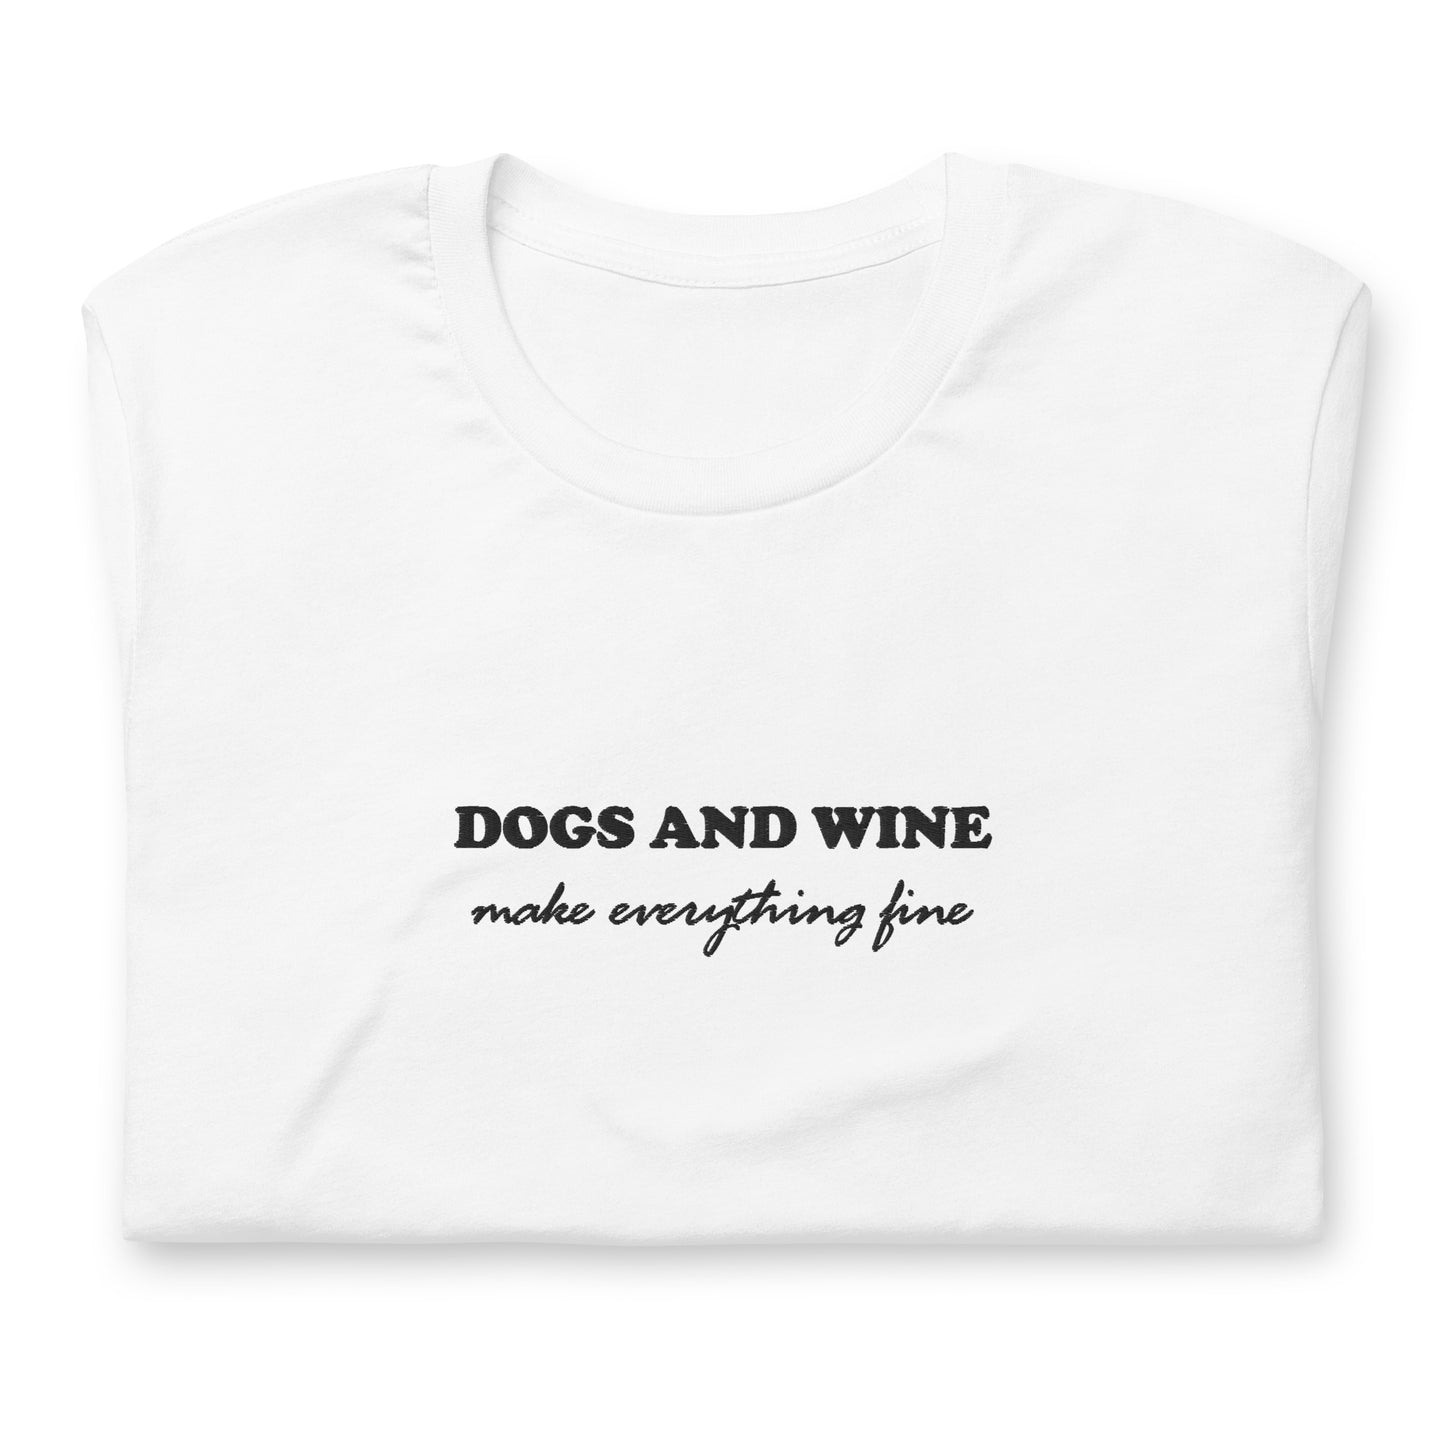 DOGS AND WINE MAKE EVERYTHING FINE - besticktes T-Shirt